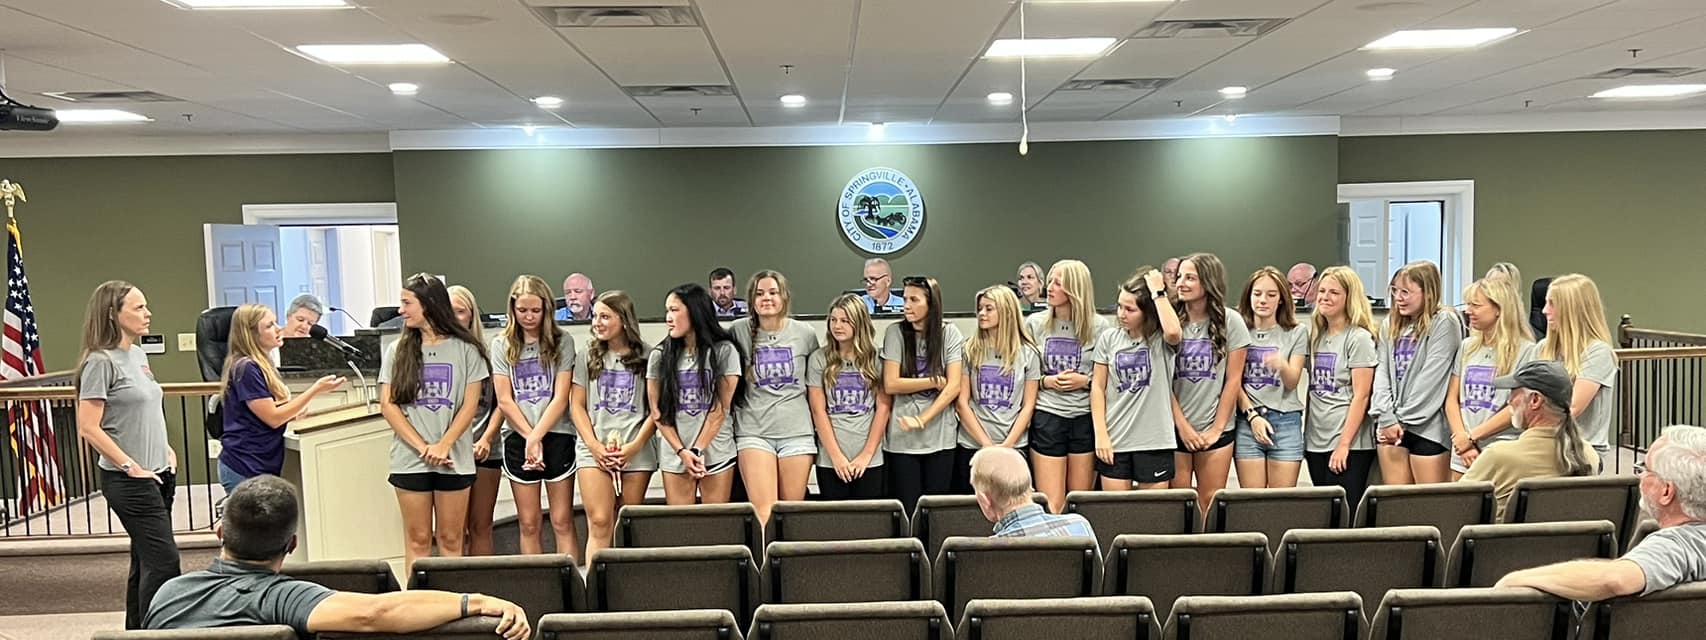 Springville Council honors Springville High School girls soccer team for winning 5A State Championship